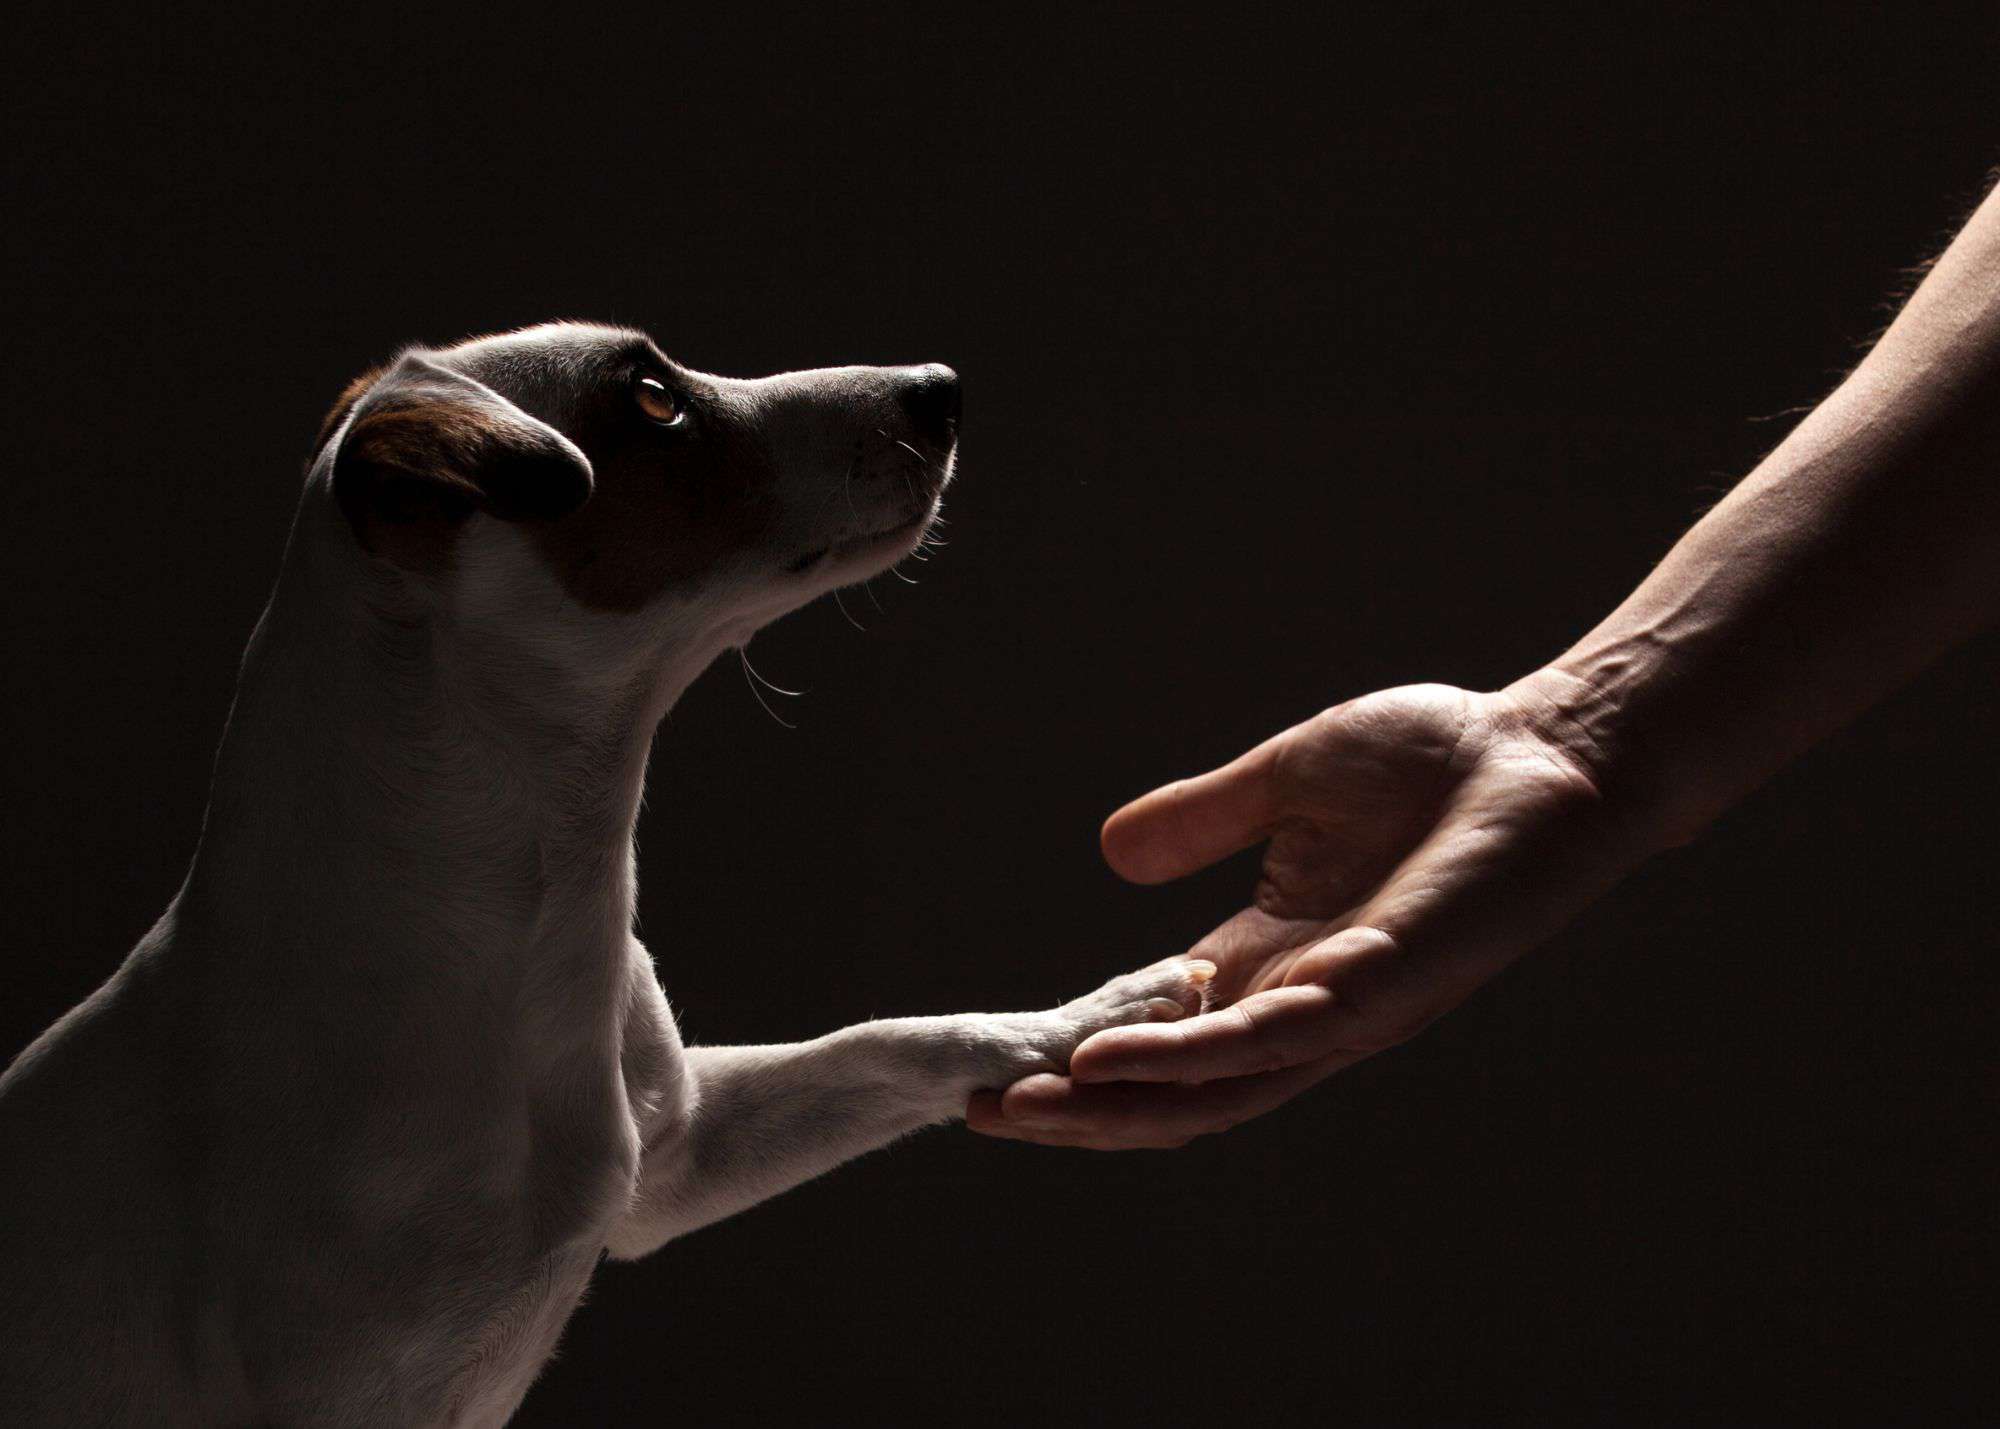 Jack Russell Terrier giving its paw to a human's hand against a black background with beautiful rim lighting